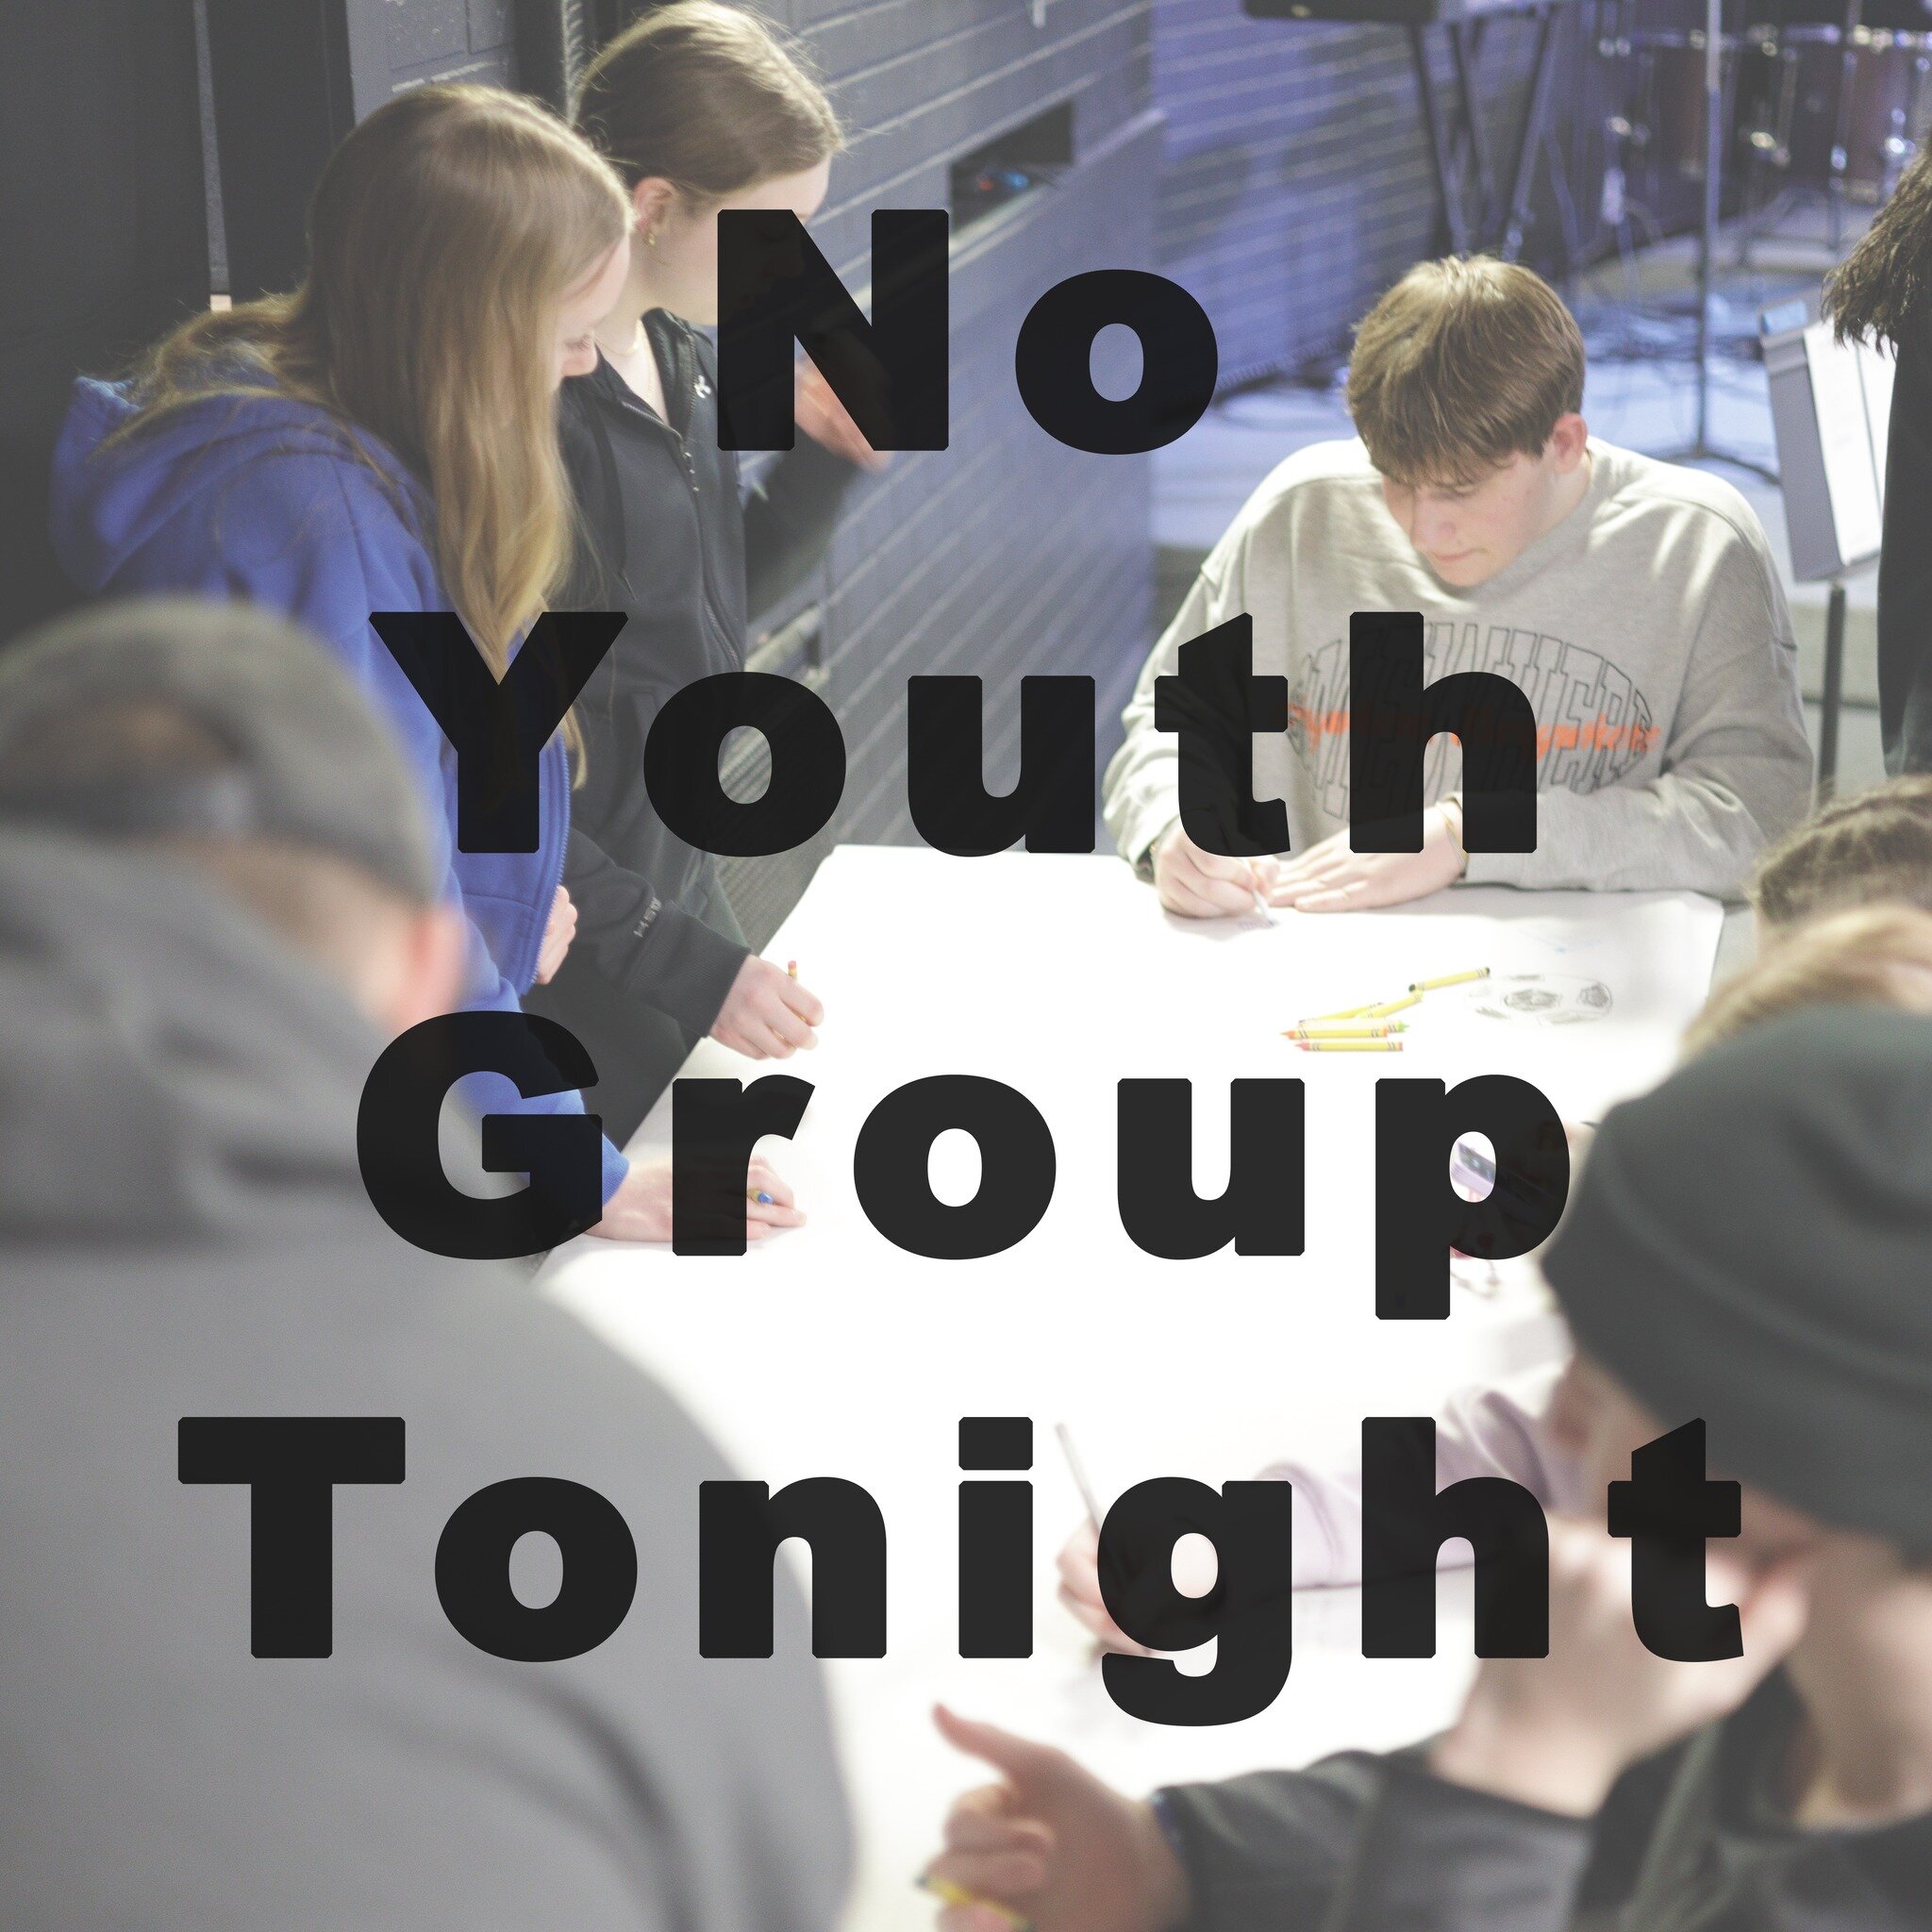 Spring break is here! Just a reminder that there is no youth tonight! See you all next week!